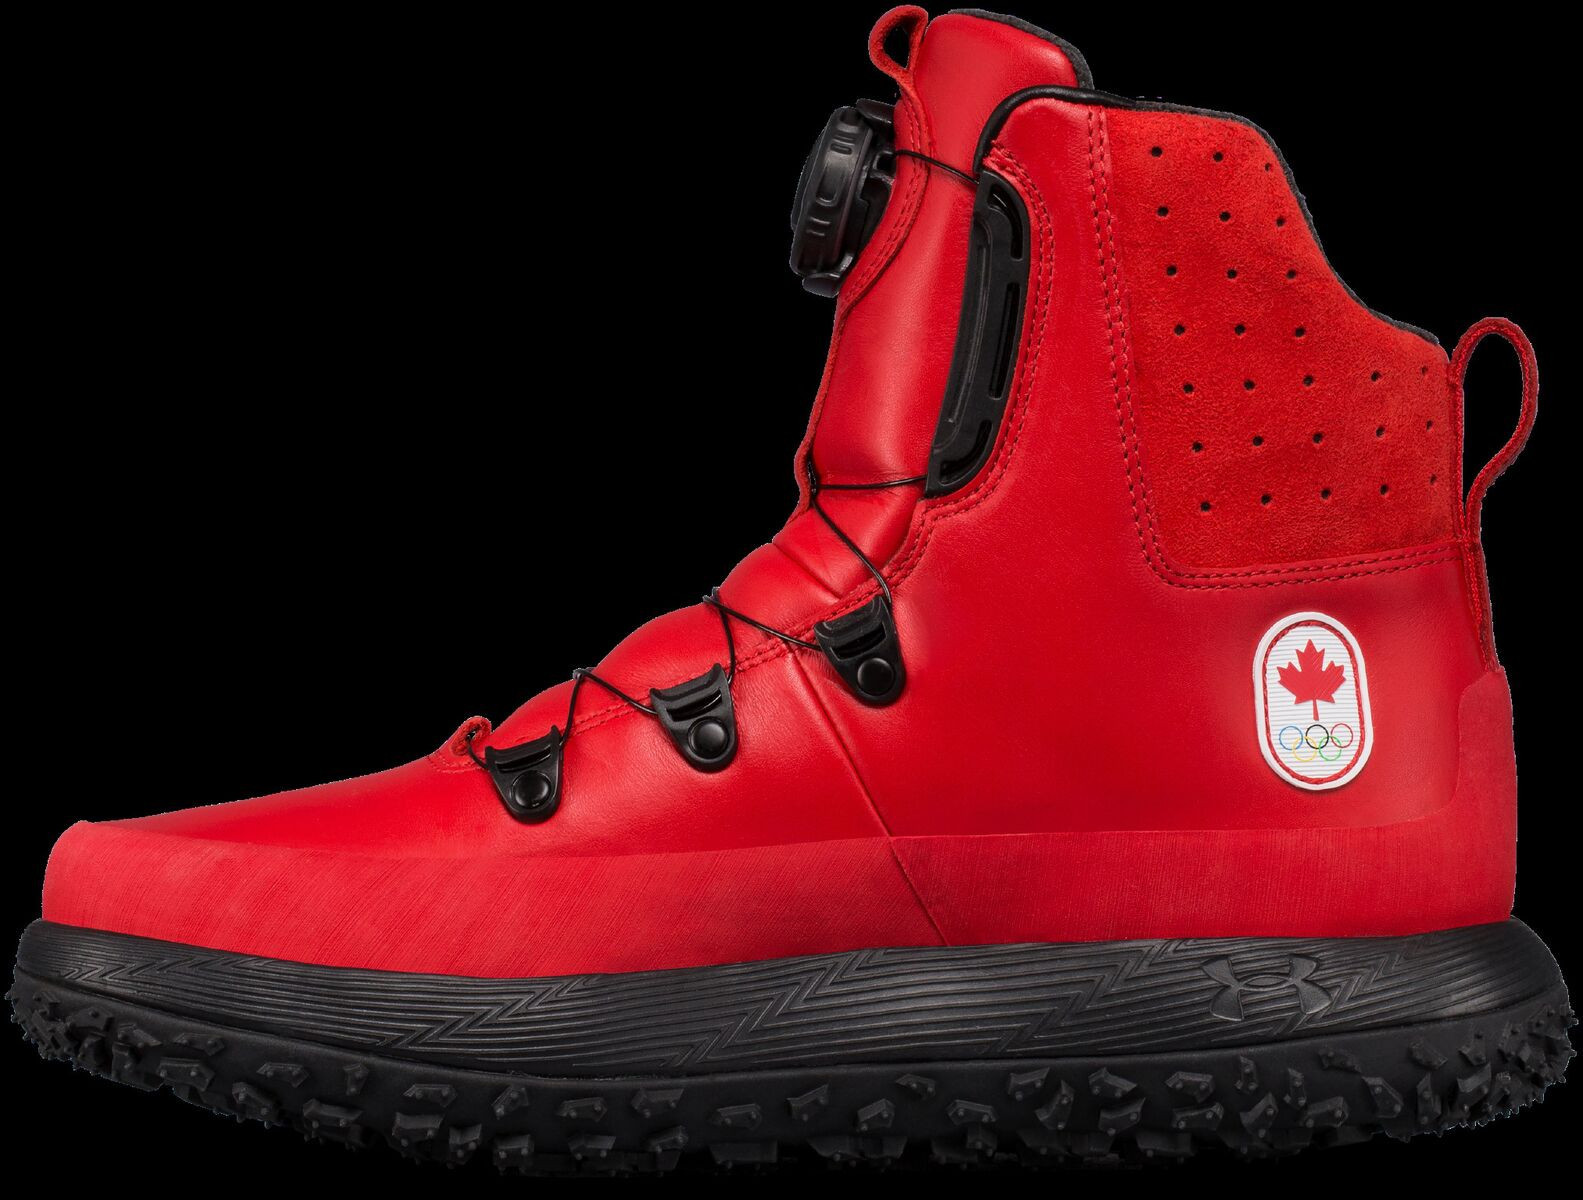 Canada's Olympic team athletes will be provided with Under Armour’s Govie Boot ©Endeavor Global Marketing